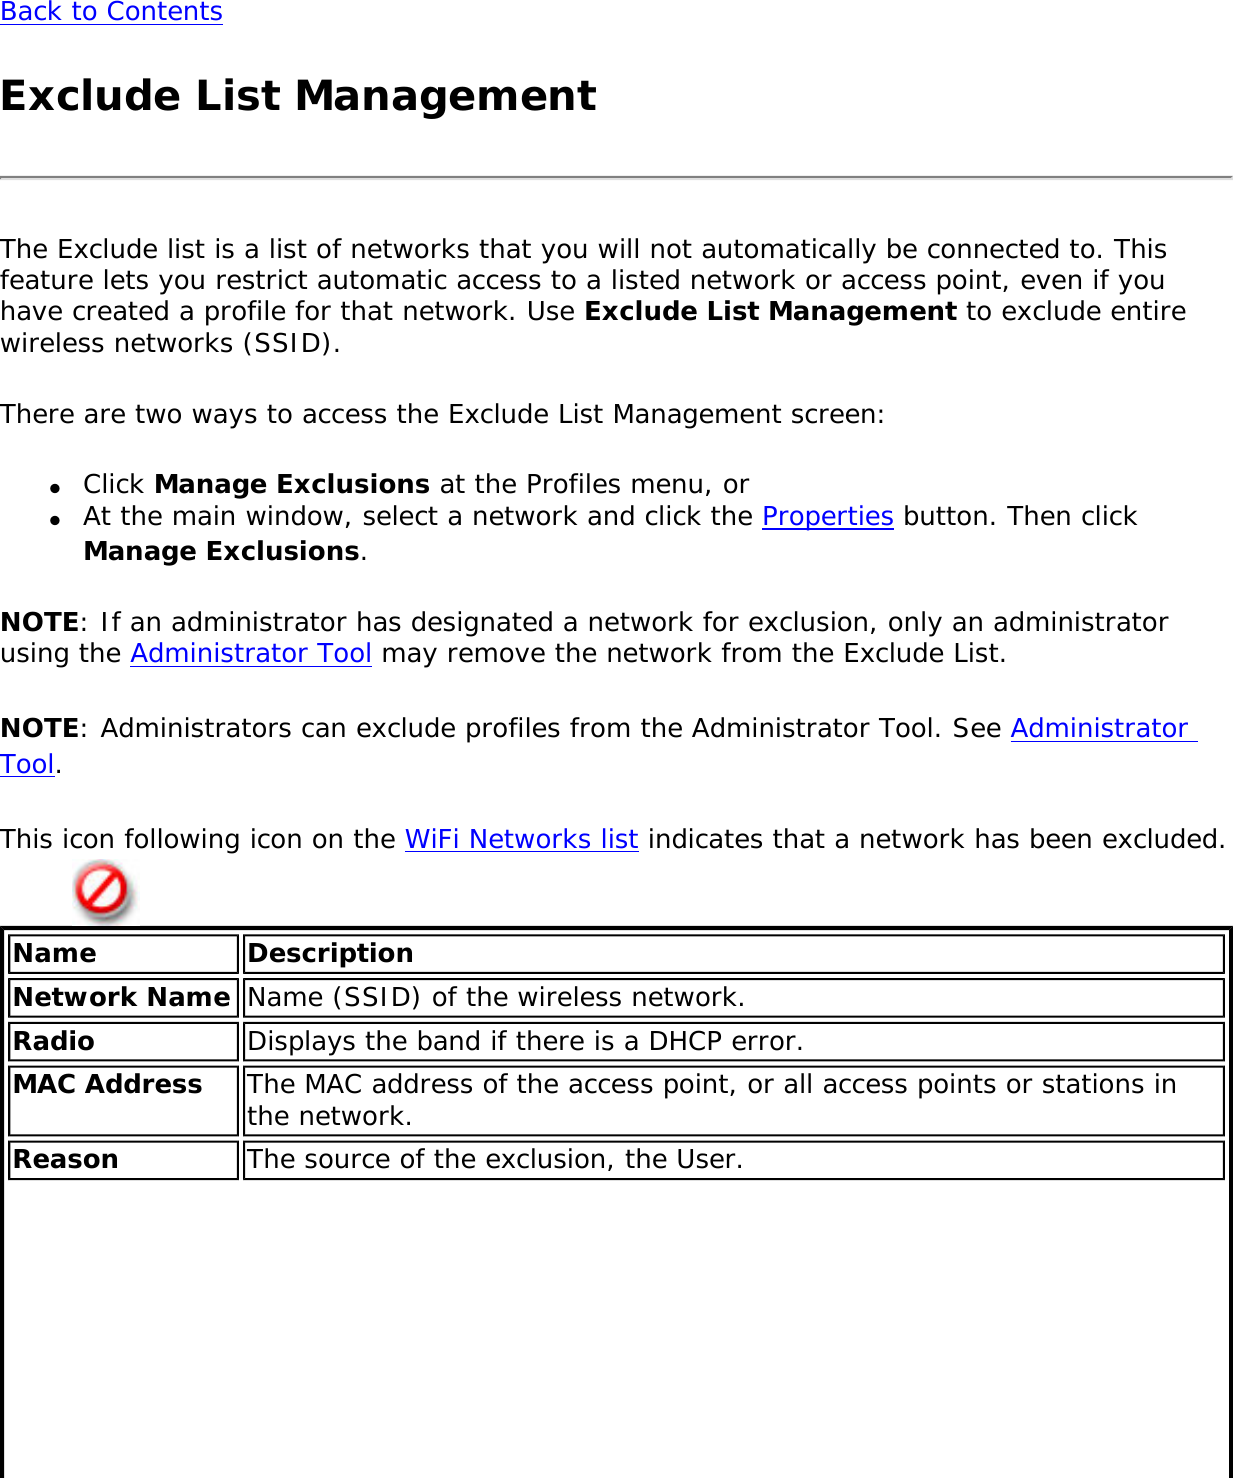 Back to ContentsExclude List ManagementThe Exclude list is a list of networks that you will not automatically be connected to. This feature lets you restrict automatic access to a listed network or access point, even if you have created a profile for that network. Use Exclude List Management to exclude entire wireless networks (SSID).There are two ways to access the Exclude List Management screen:●     Click Manage Exclusions at the Profiles menu, or ●     At the main window, select a network and click the Properties button. Then click Manage Exclusions.NOTE: If an administrator has designated a network for exclusion, only an administrator using the Administrator Tool may remove the network from the Exclude List.NOTE: Administrators can exclude profiles from the Administrator Tool. See Administrator Tool.This icon following icon on the WiFi Networks list indicates that a network has been excluded.Name DescriptionNetwork Name Name (SSID) of the wireless network.Radio Displays the band if there is a DHCP error.MAC Address The MAC address of the access point, or all access points or stations in the network. Reason The source of the exclusion, the User.